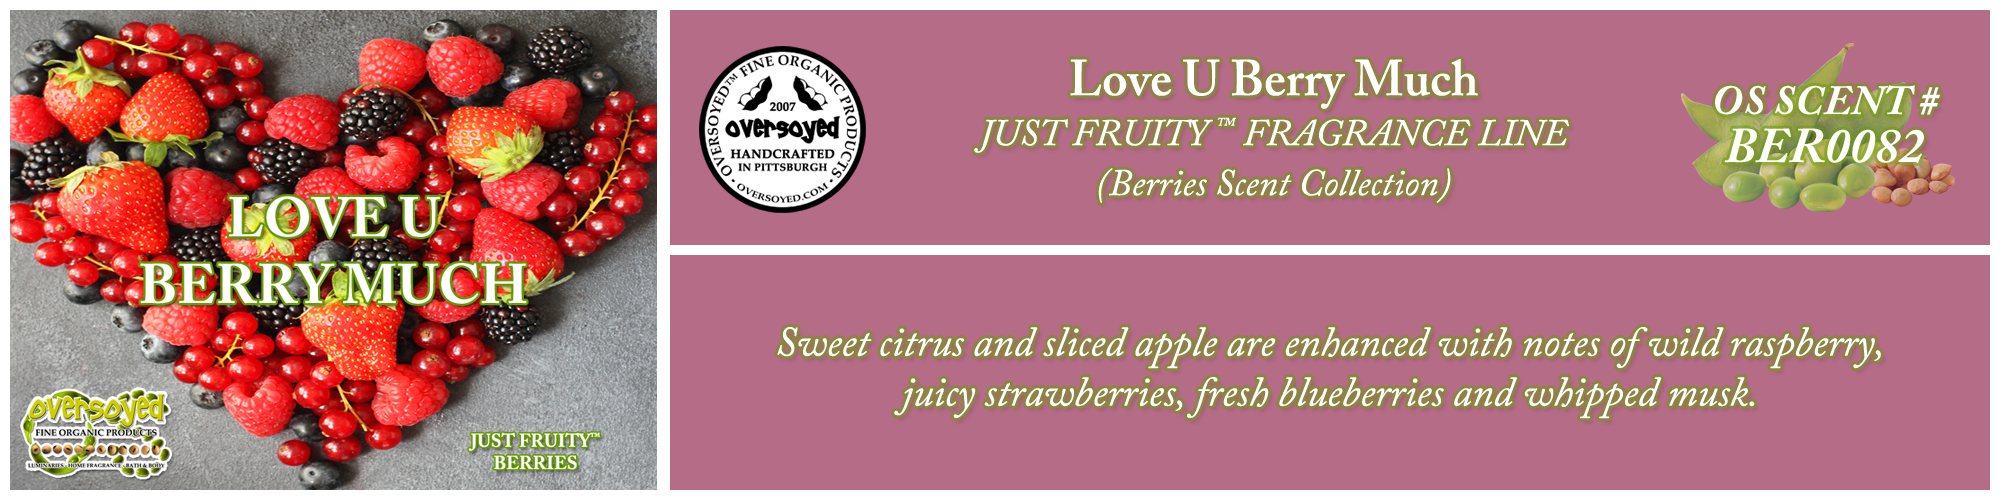 Love U Berry Much Handcrafted Products Collection